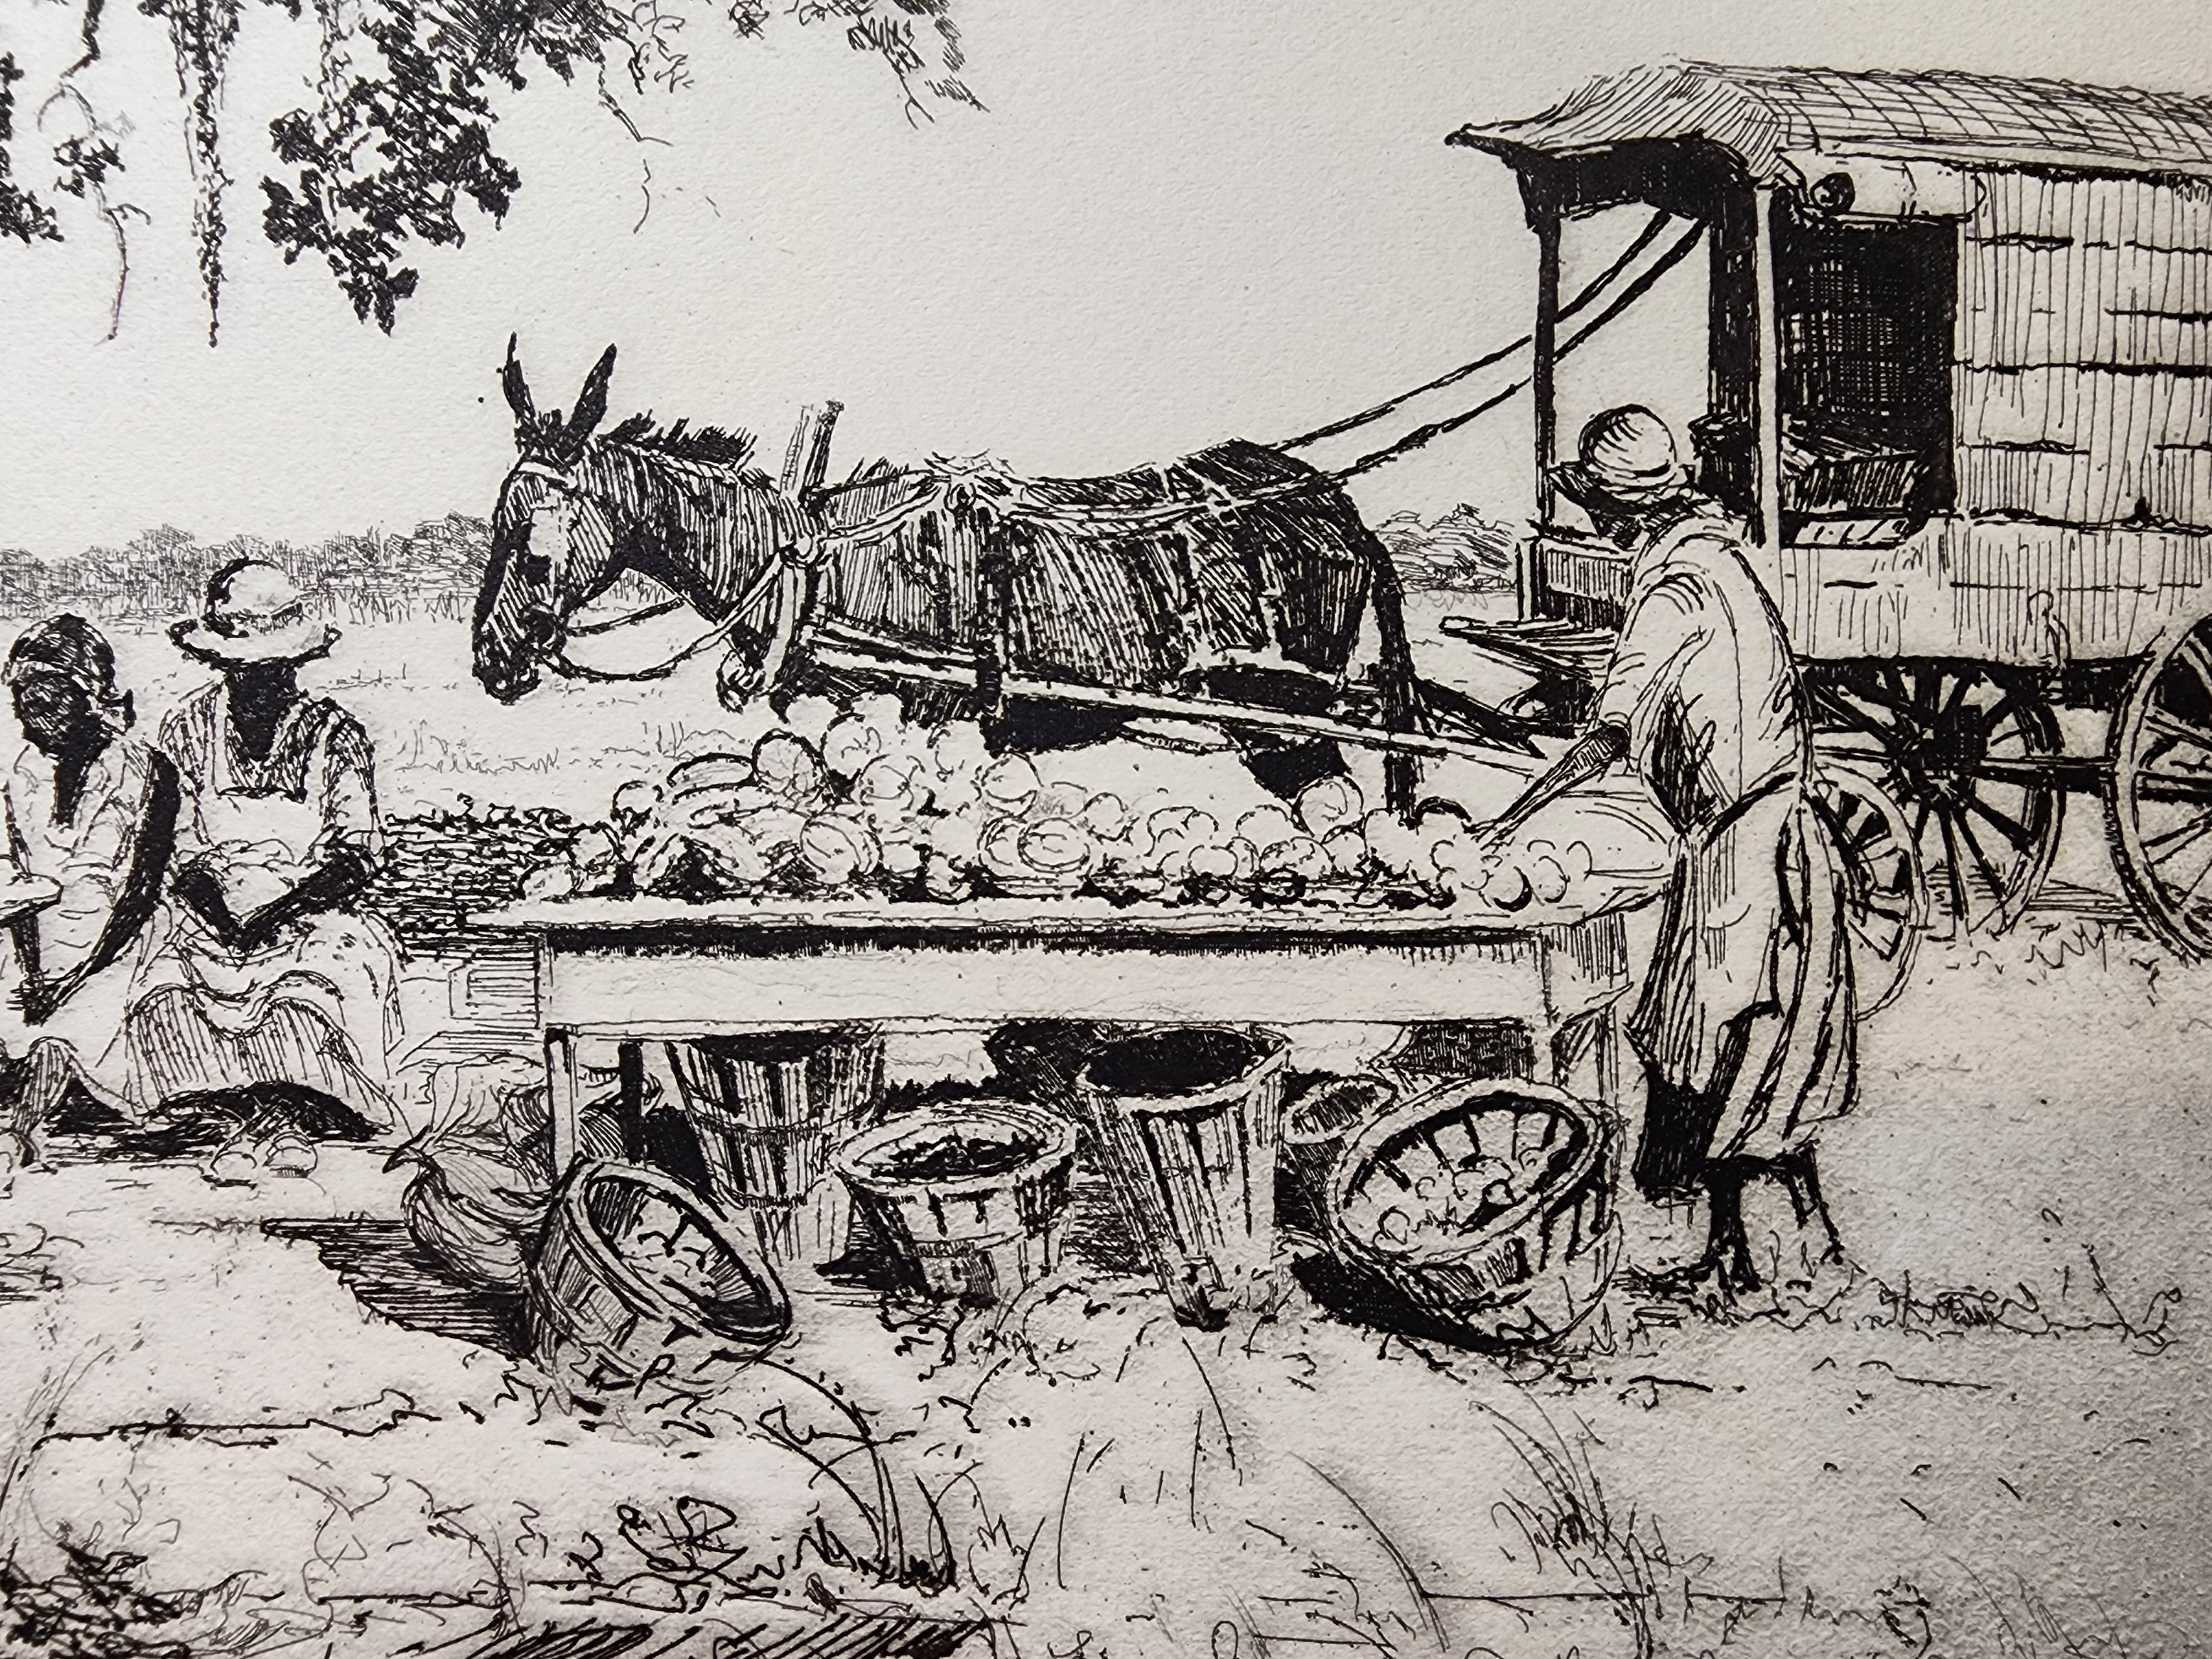 An excellent impression of one of the rarest and most desireable Verner images- Road to Folly (Beach) showing the basket people selling roadside fruits and vegetables.

The image is well inked and has a strong platemark.  There is a repaired